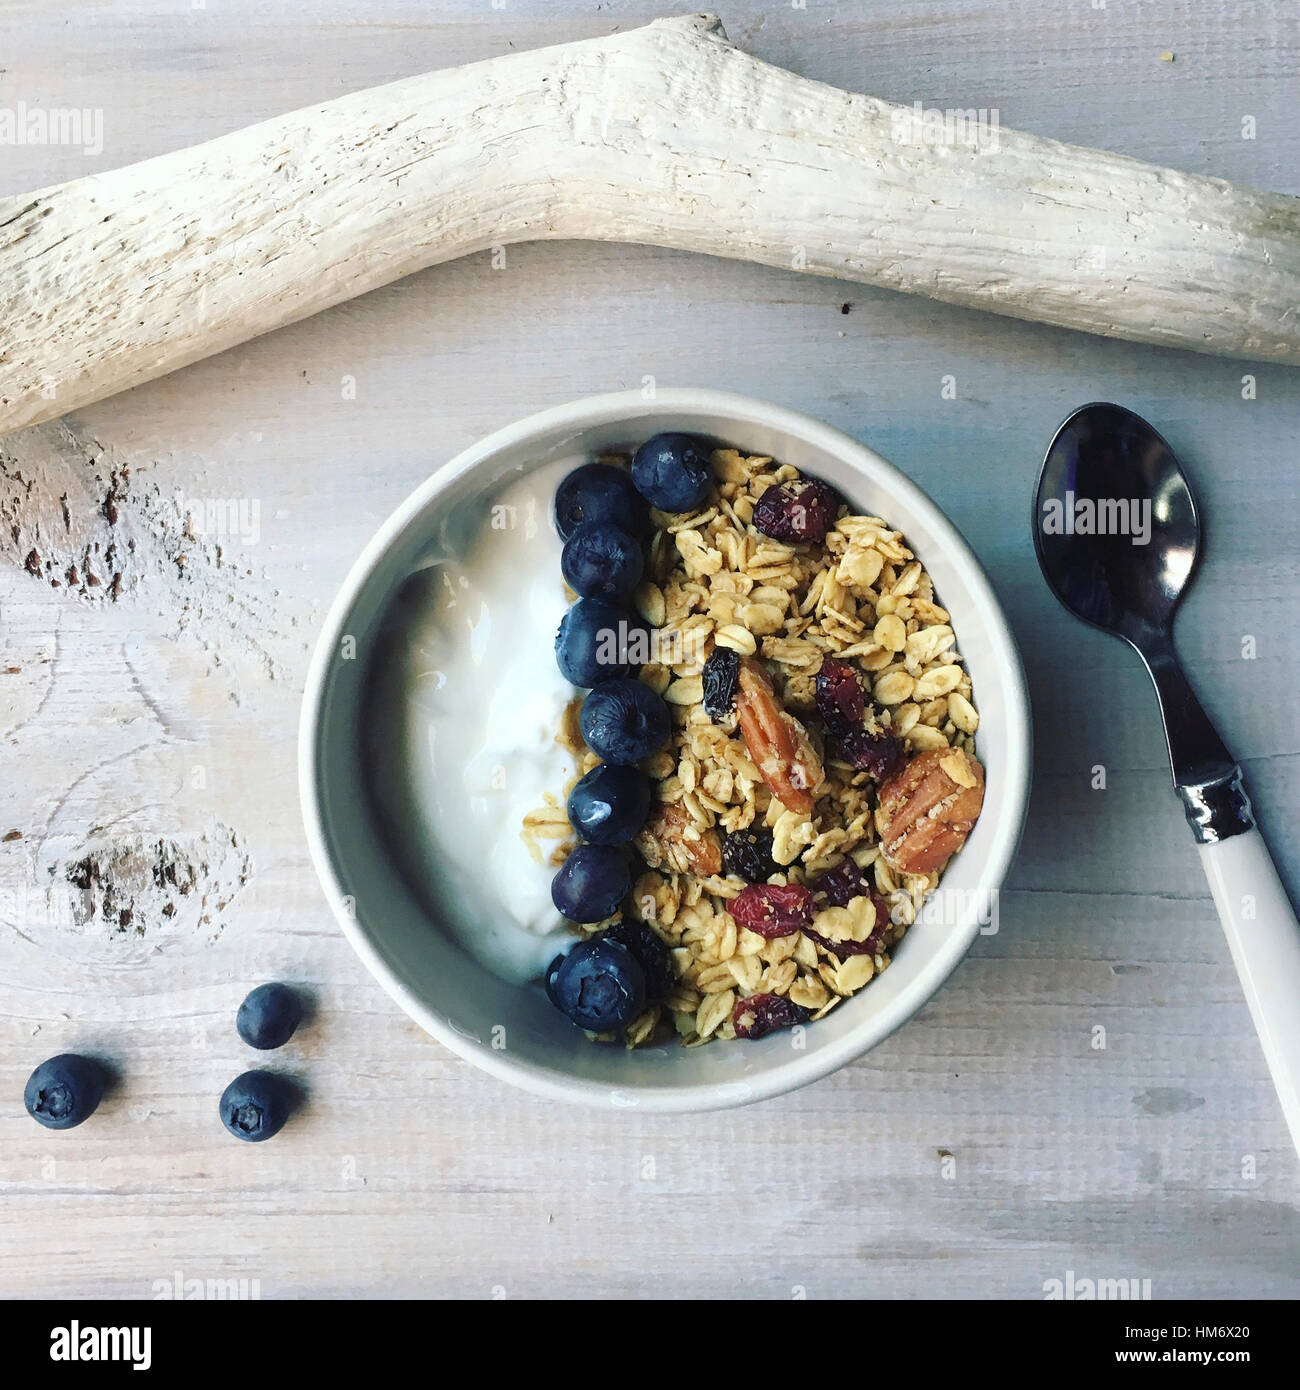 Overhead view of granola in bowl on table Stock Photo